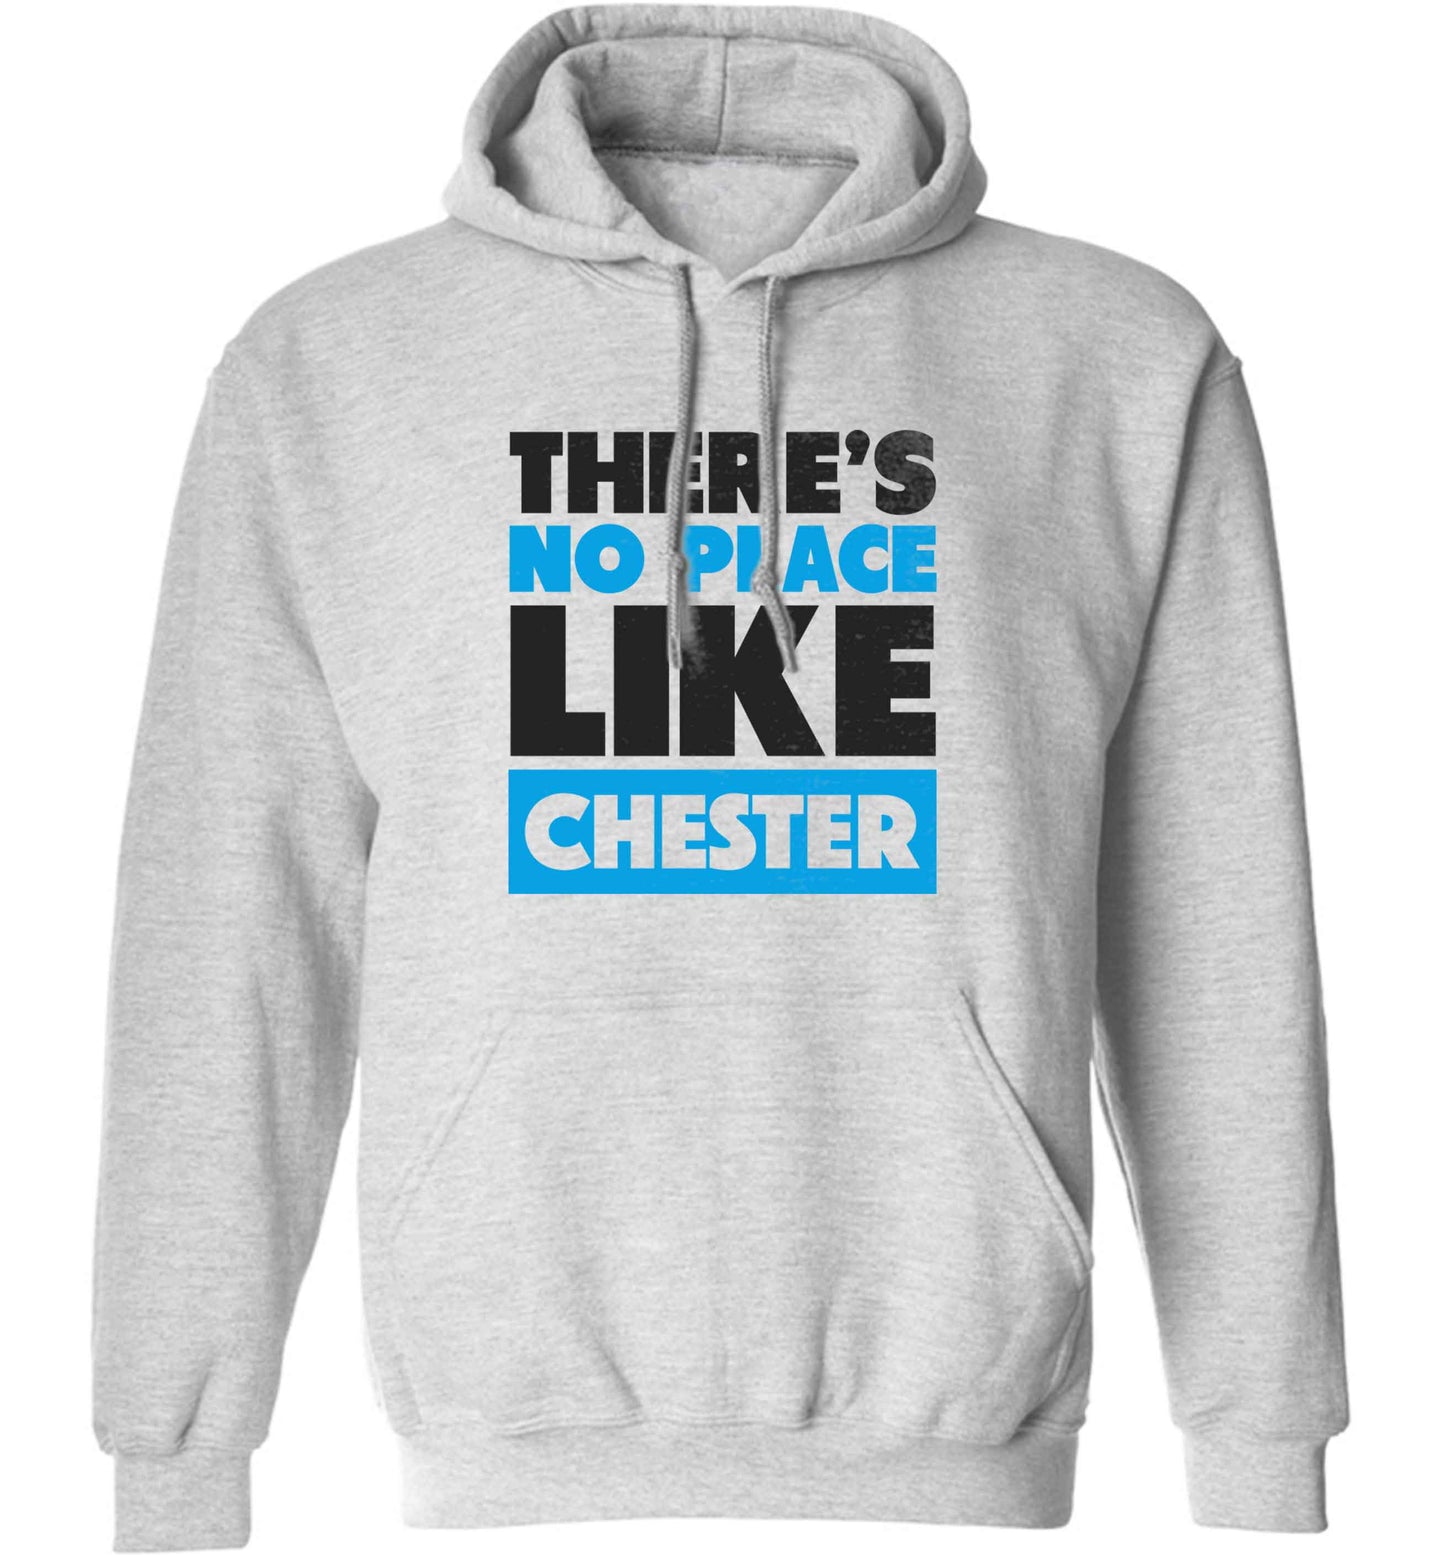 There's no place like Chester adults unisex grey hoodie 2XL